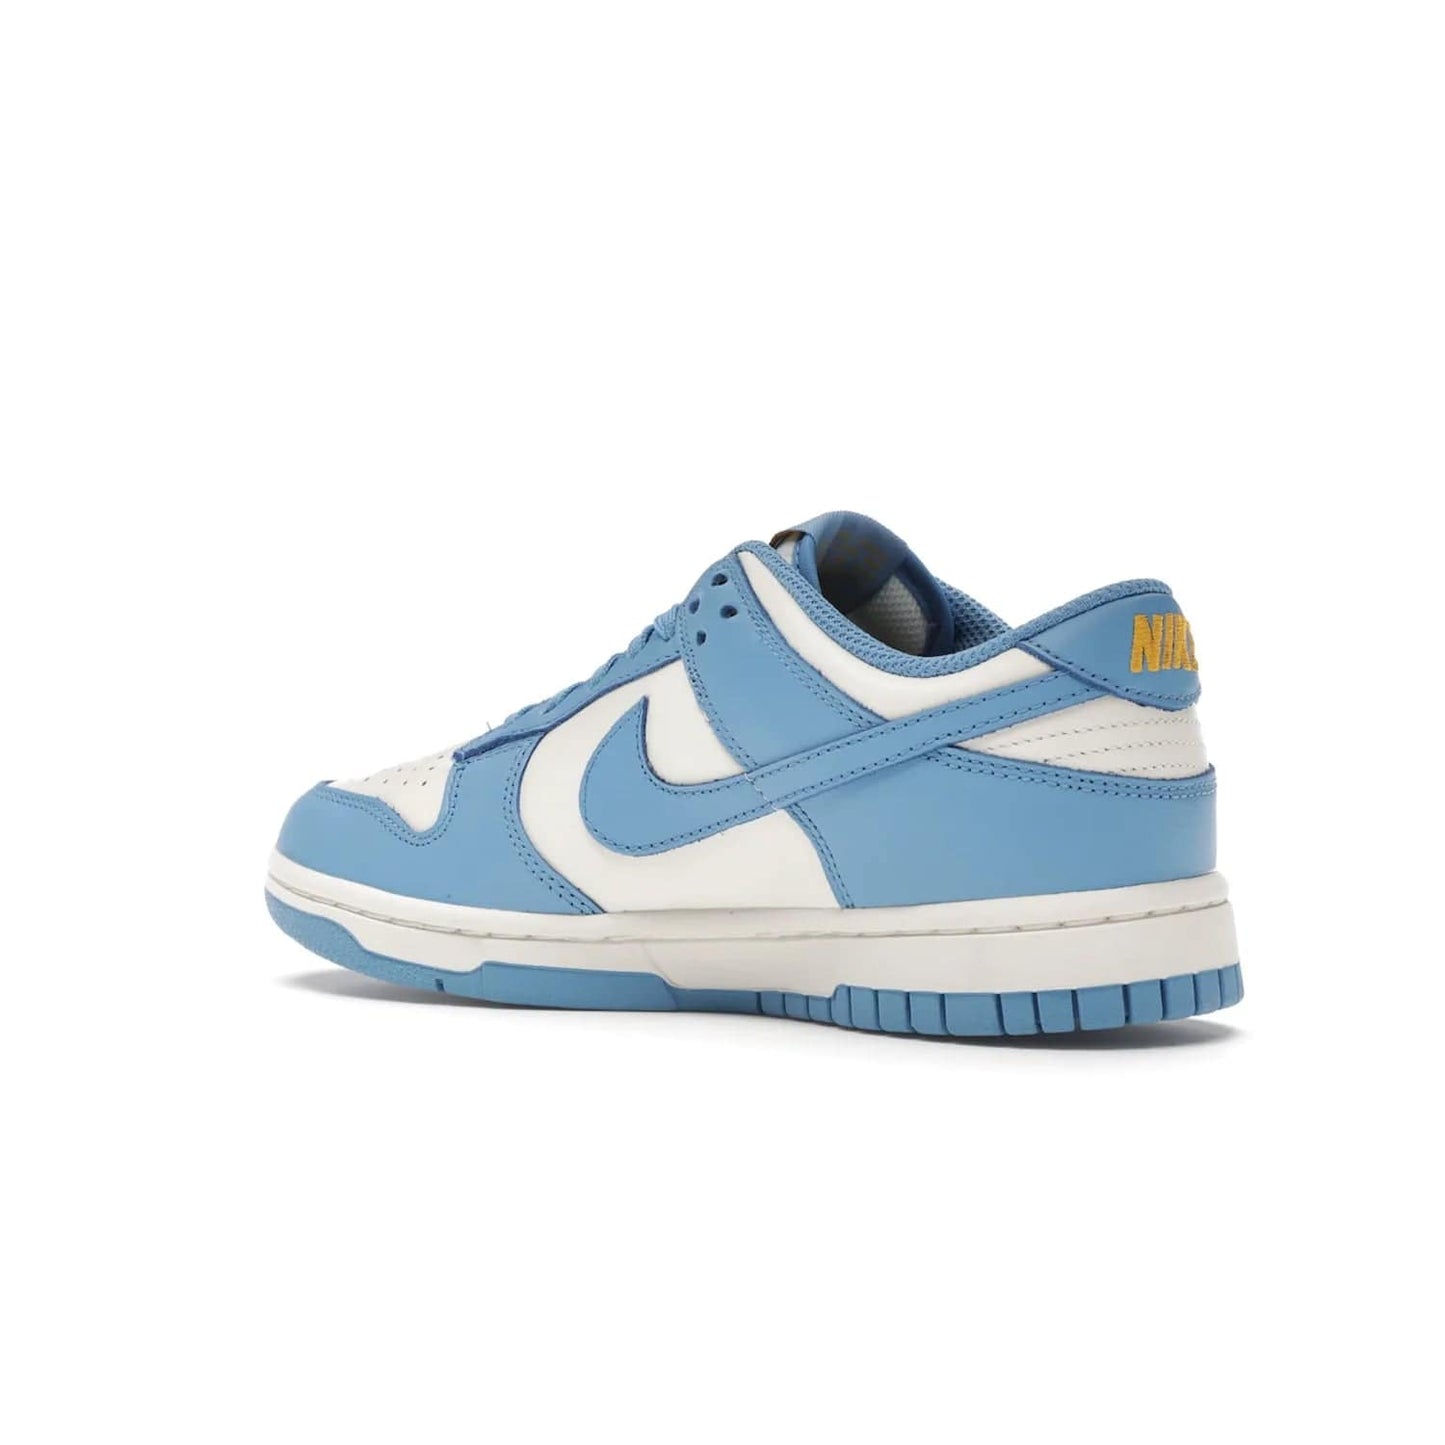 Nike Dunk Low Coast (Women's) - Image 23 - Only at www.BallersClubKickz.com - Iconic UCLA colors honor the west coast with the Nike Dunk Low Coast (Women's), a bold combo of light blue, white and yellow. Light leather upper with white midsole and light EVA outsole offer a modern twist. Released Feb 2021 for $100.